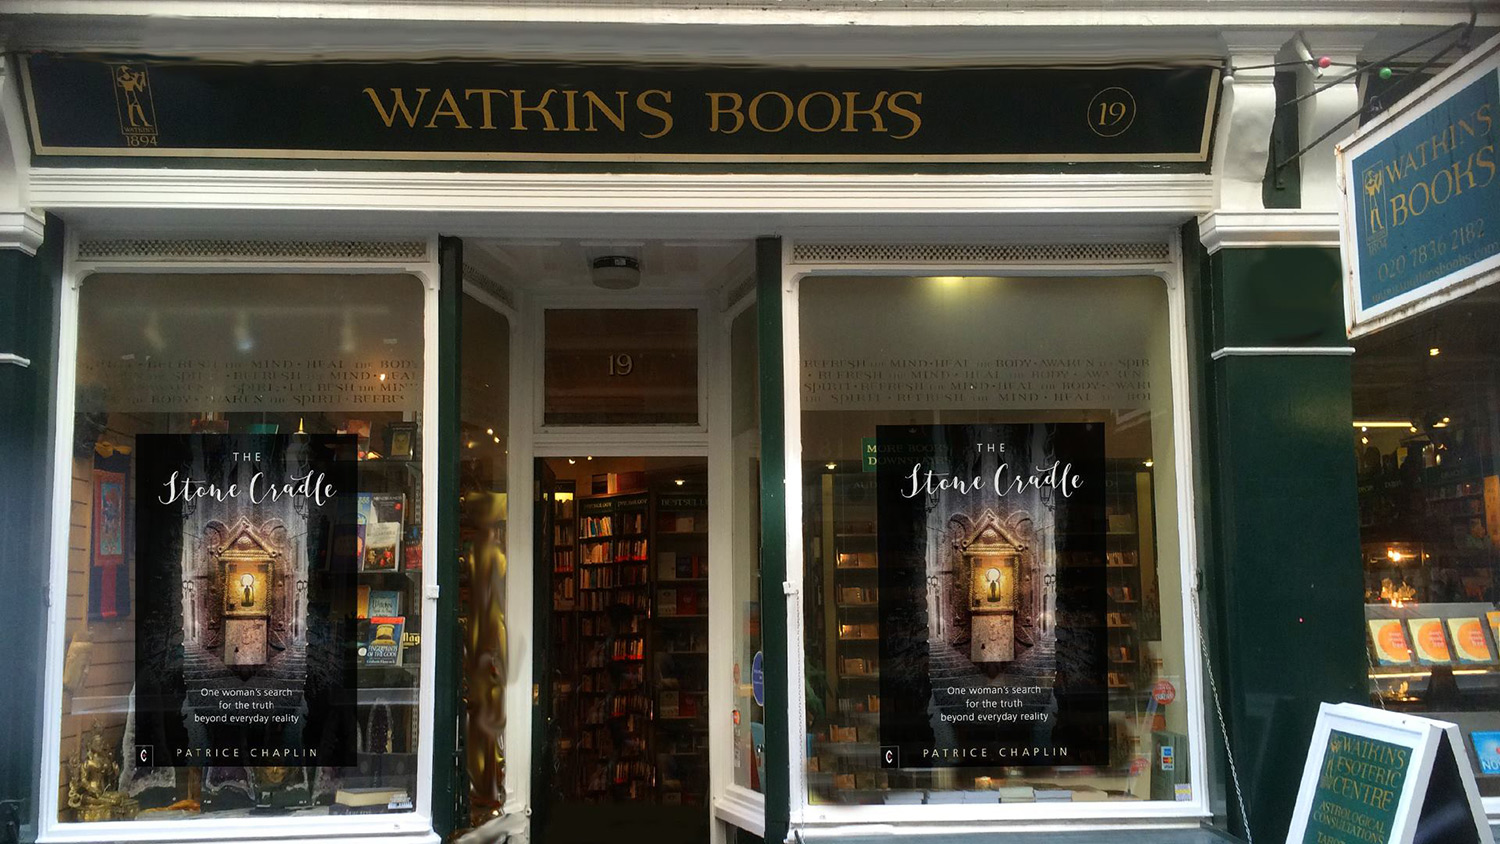 'The Stone Cradle' at Watkins Books